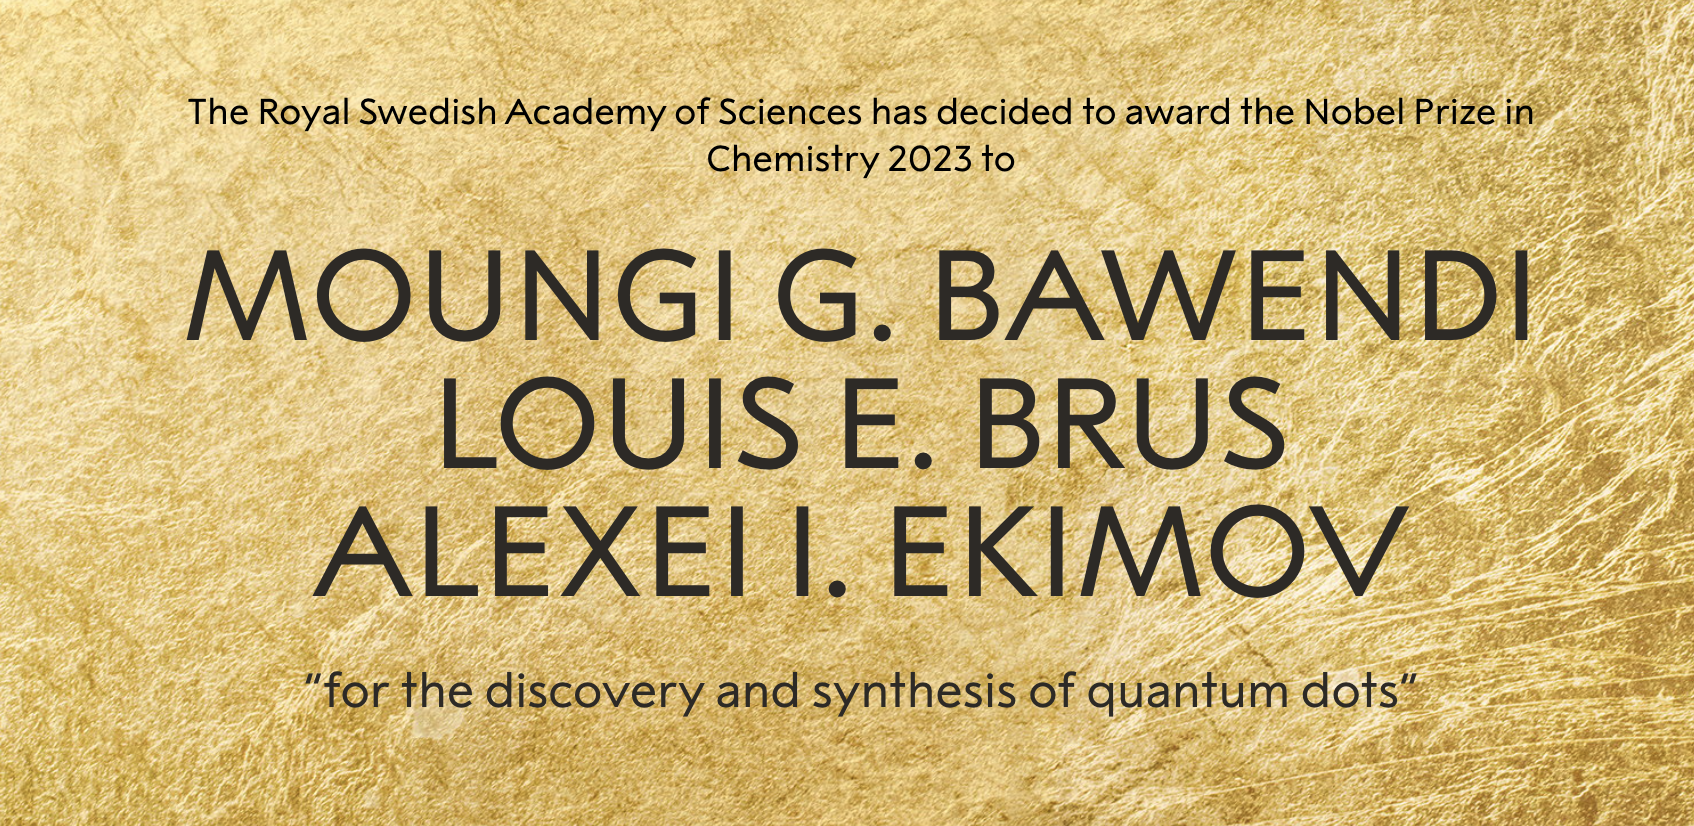 Nobel Chemistry Prize 2023: Trio Awarded For Quantum Dots Discovery And Synthesis